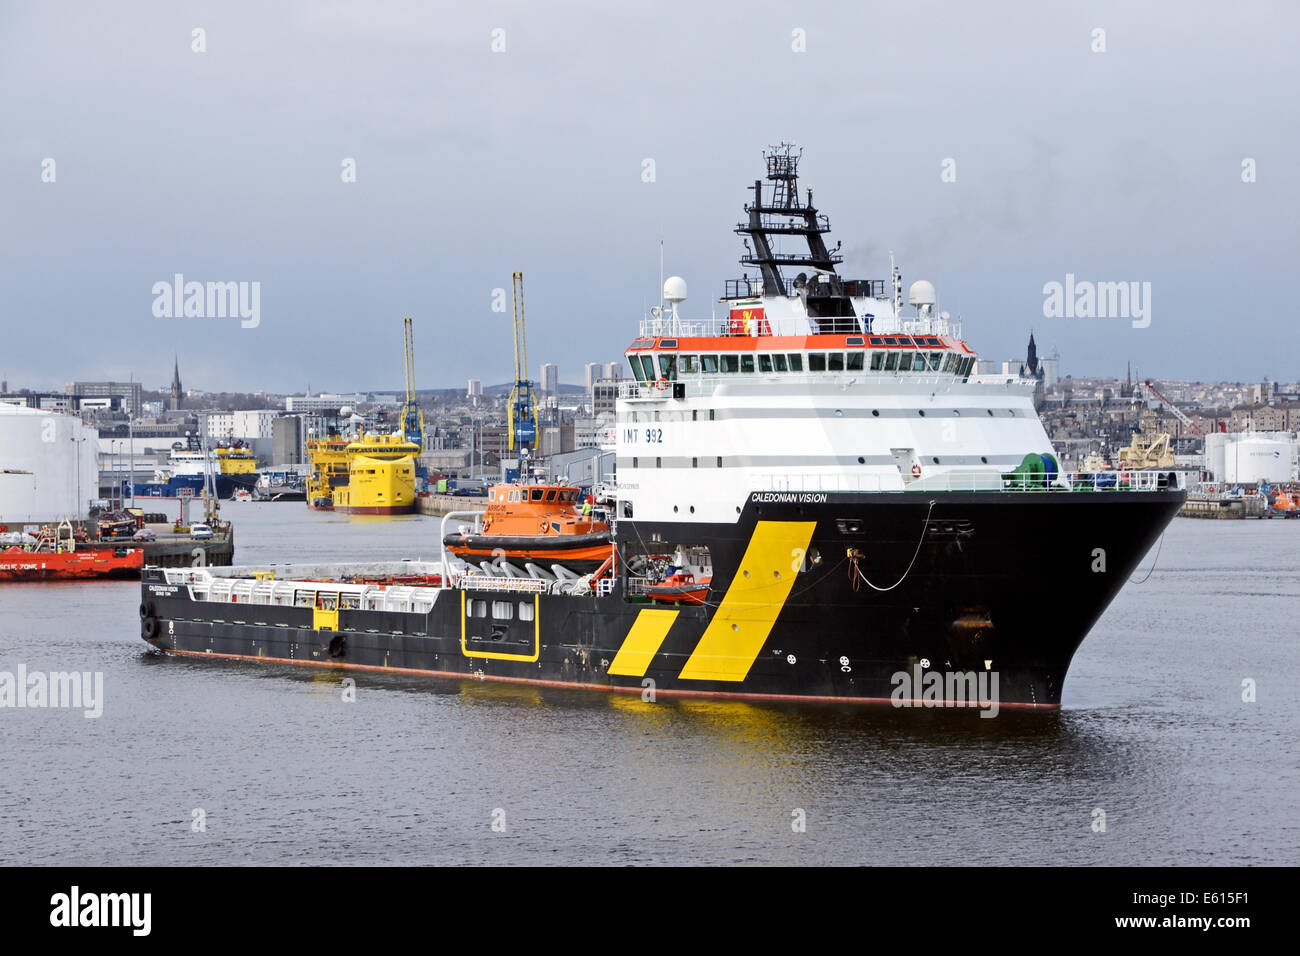 Oil supply ship Caledonian Vision in Aberdeen Harbour Aberdeen Scotland Stock Photo